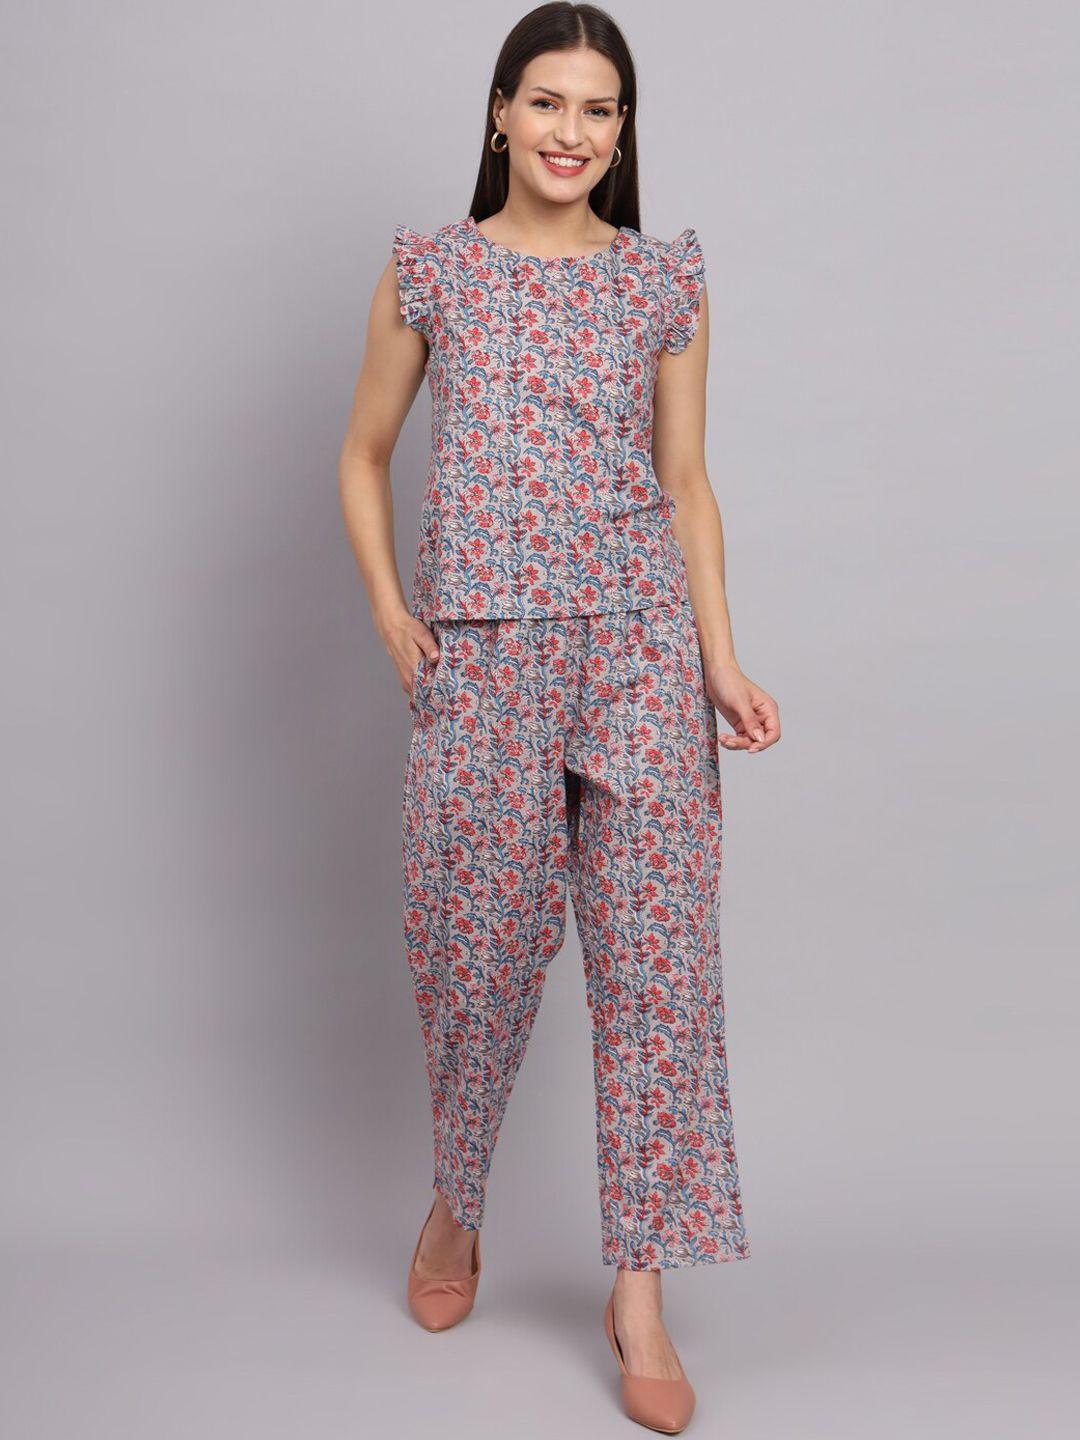 deckedup floral printed top with trouser